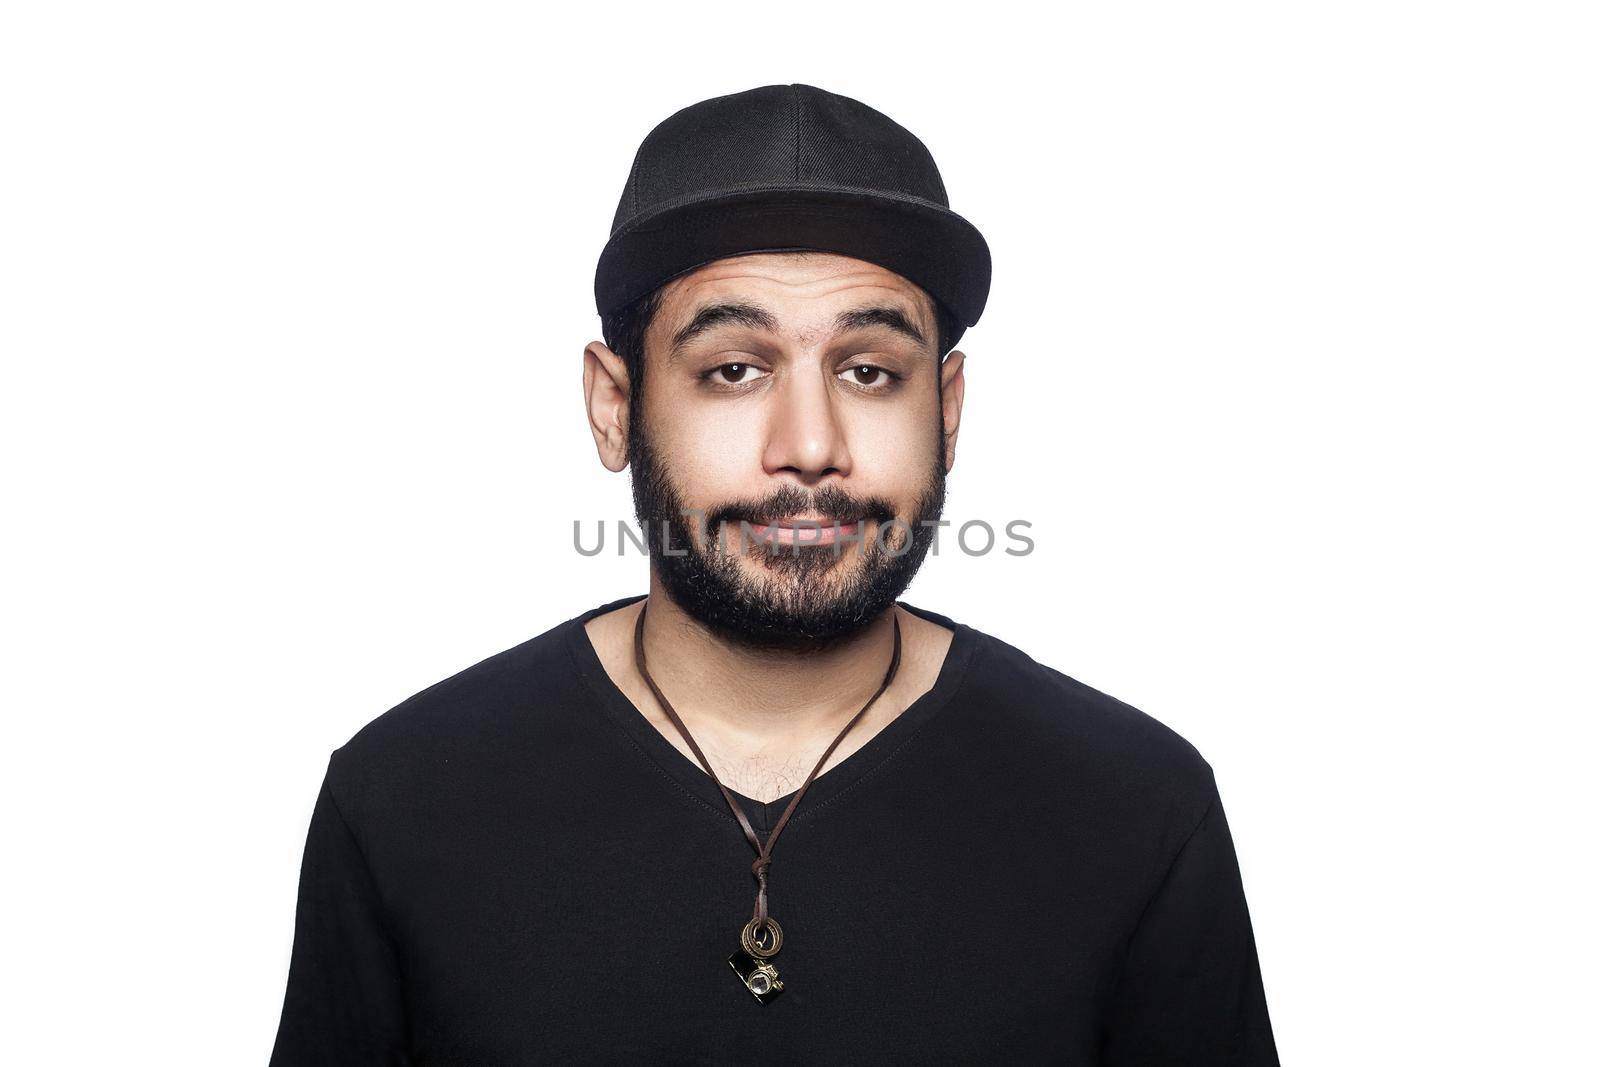 emotional man in black shirt and cap on white background by Khosro1